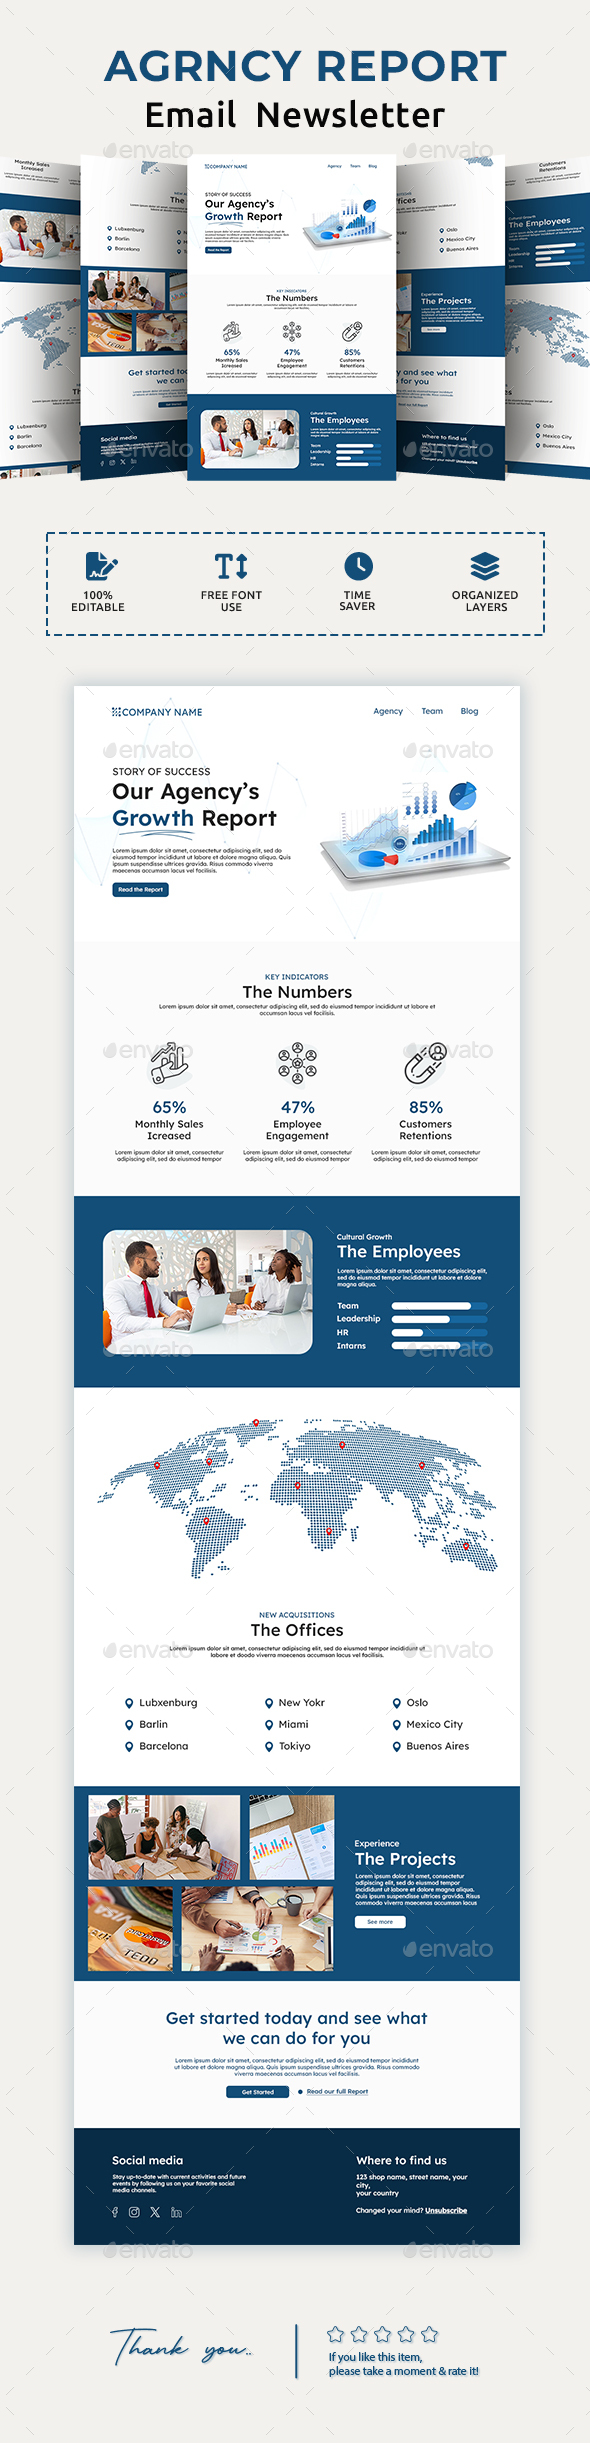 Corporate Agency Email Newsletter PSD Template